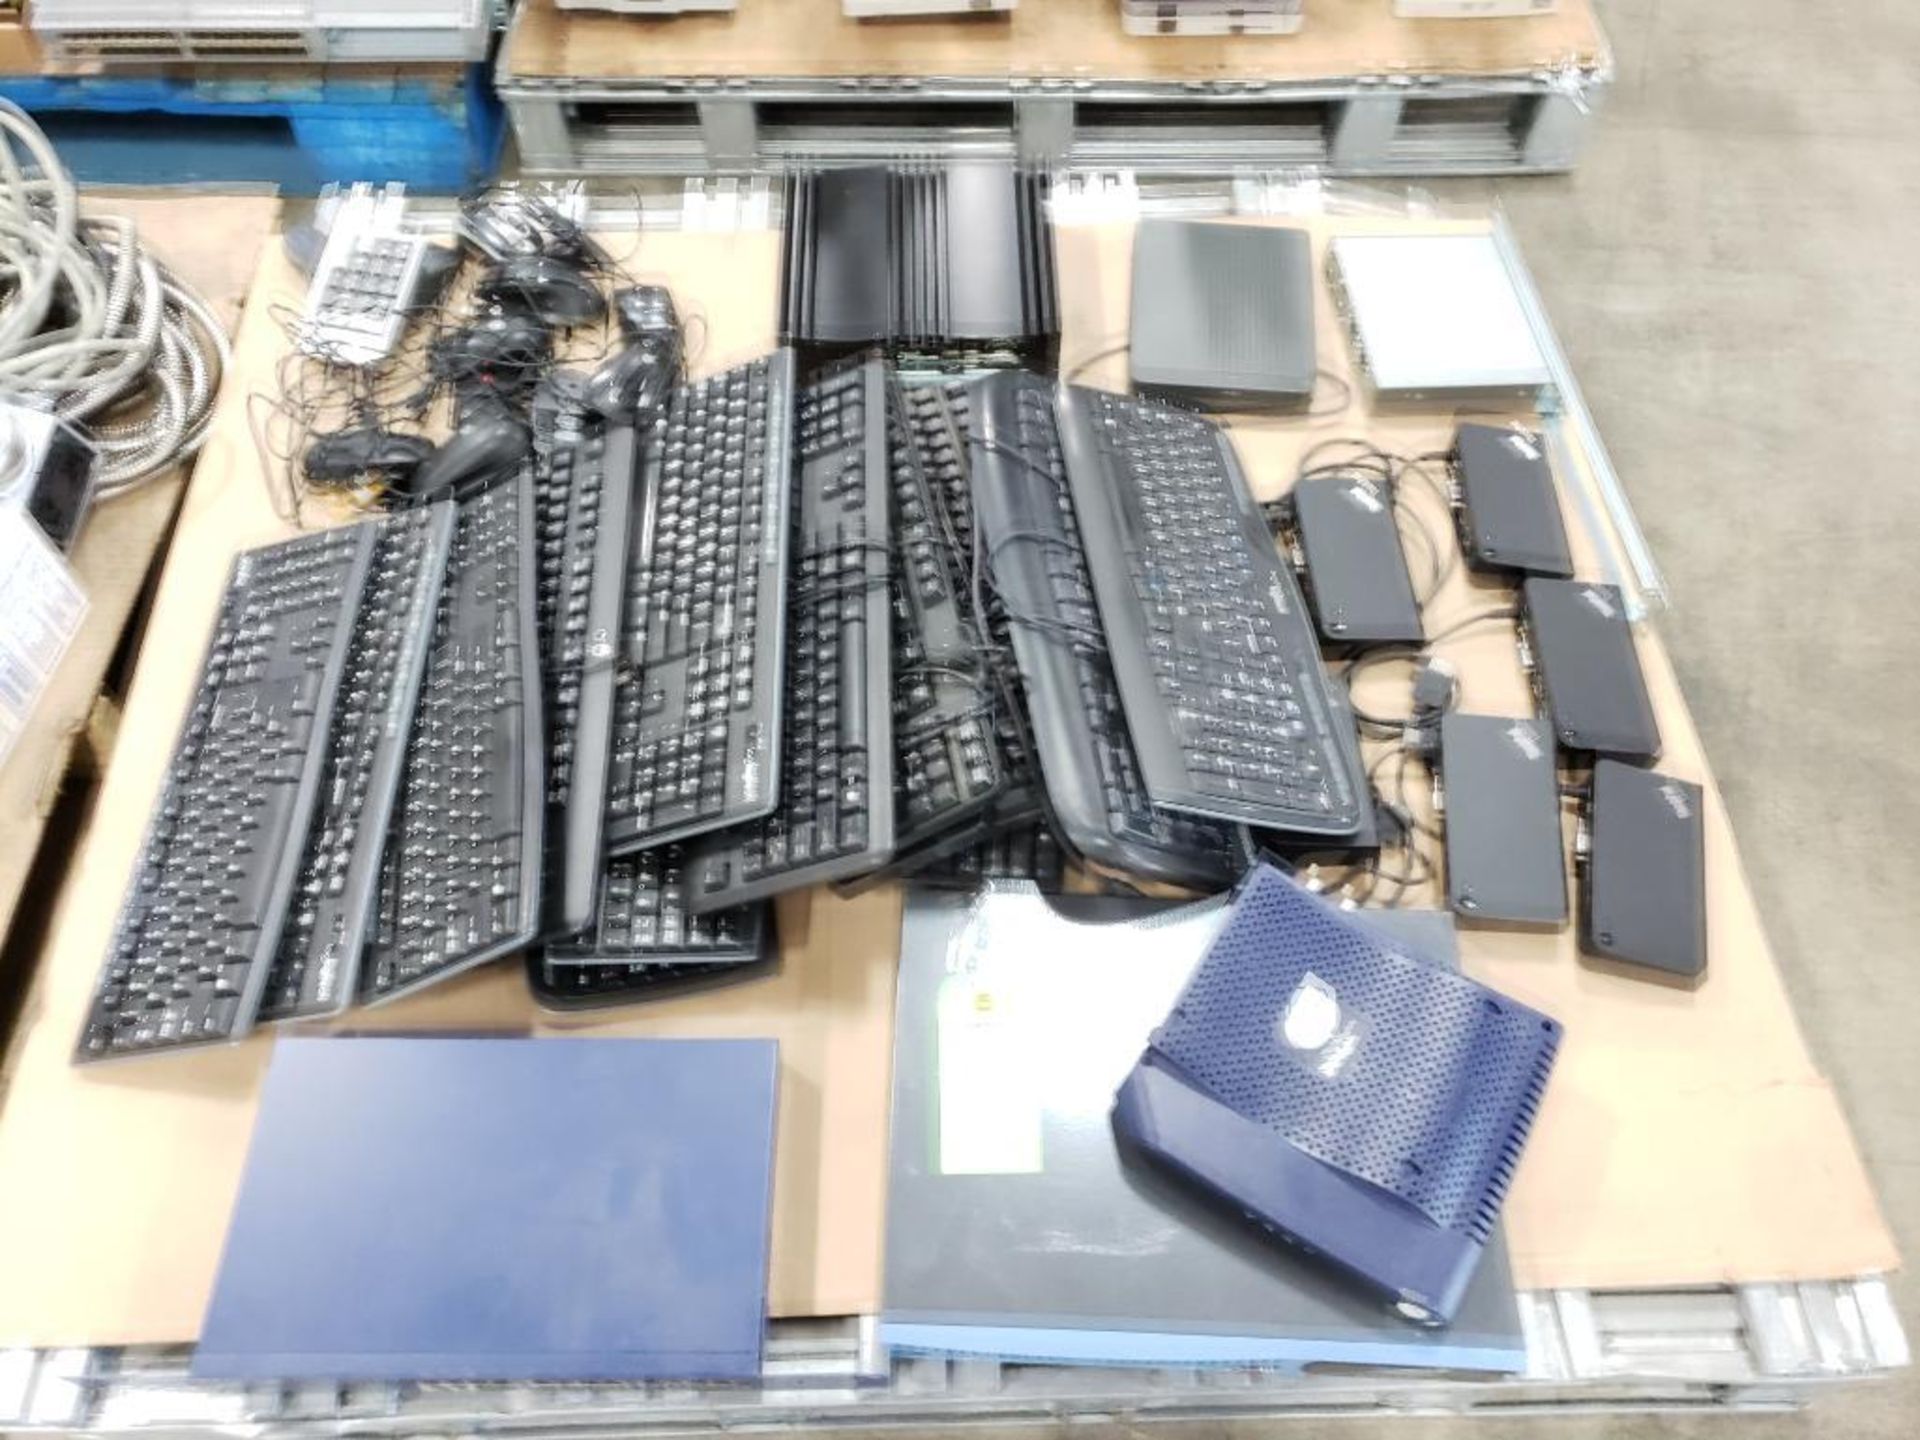 Pallet of assorted computer parts and equipment.